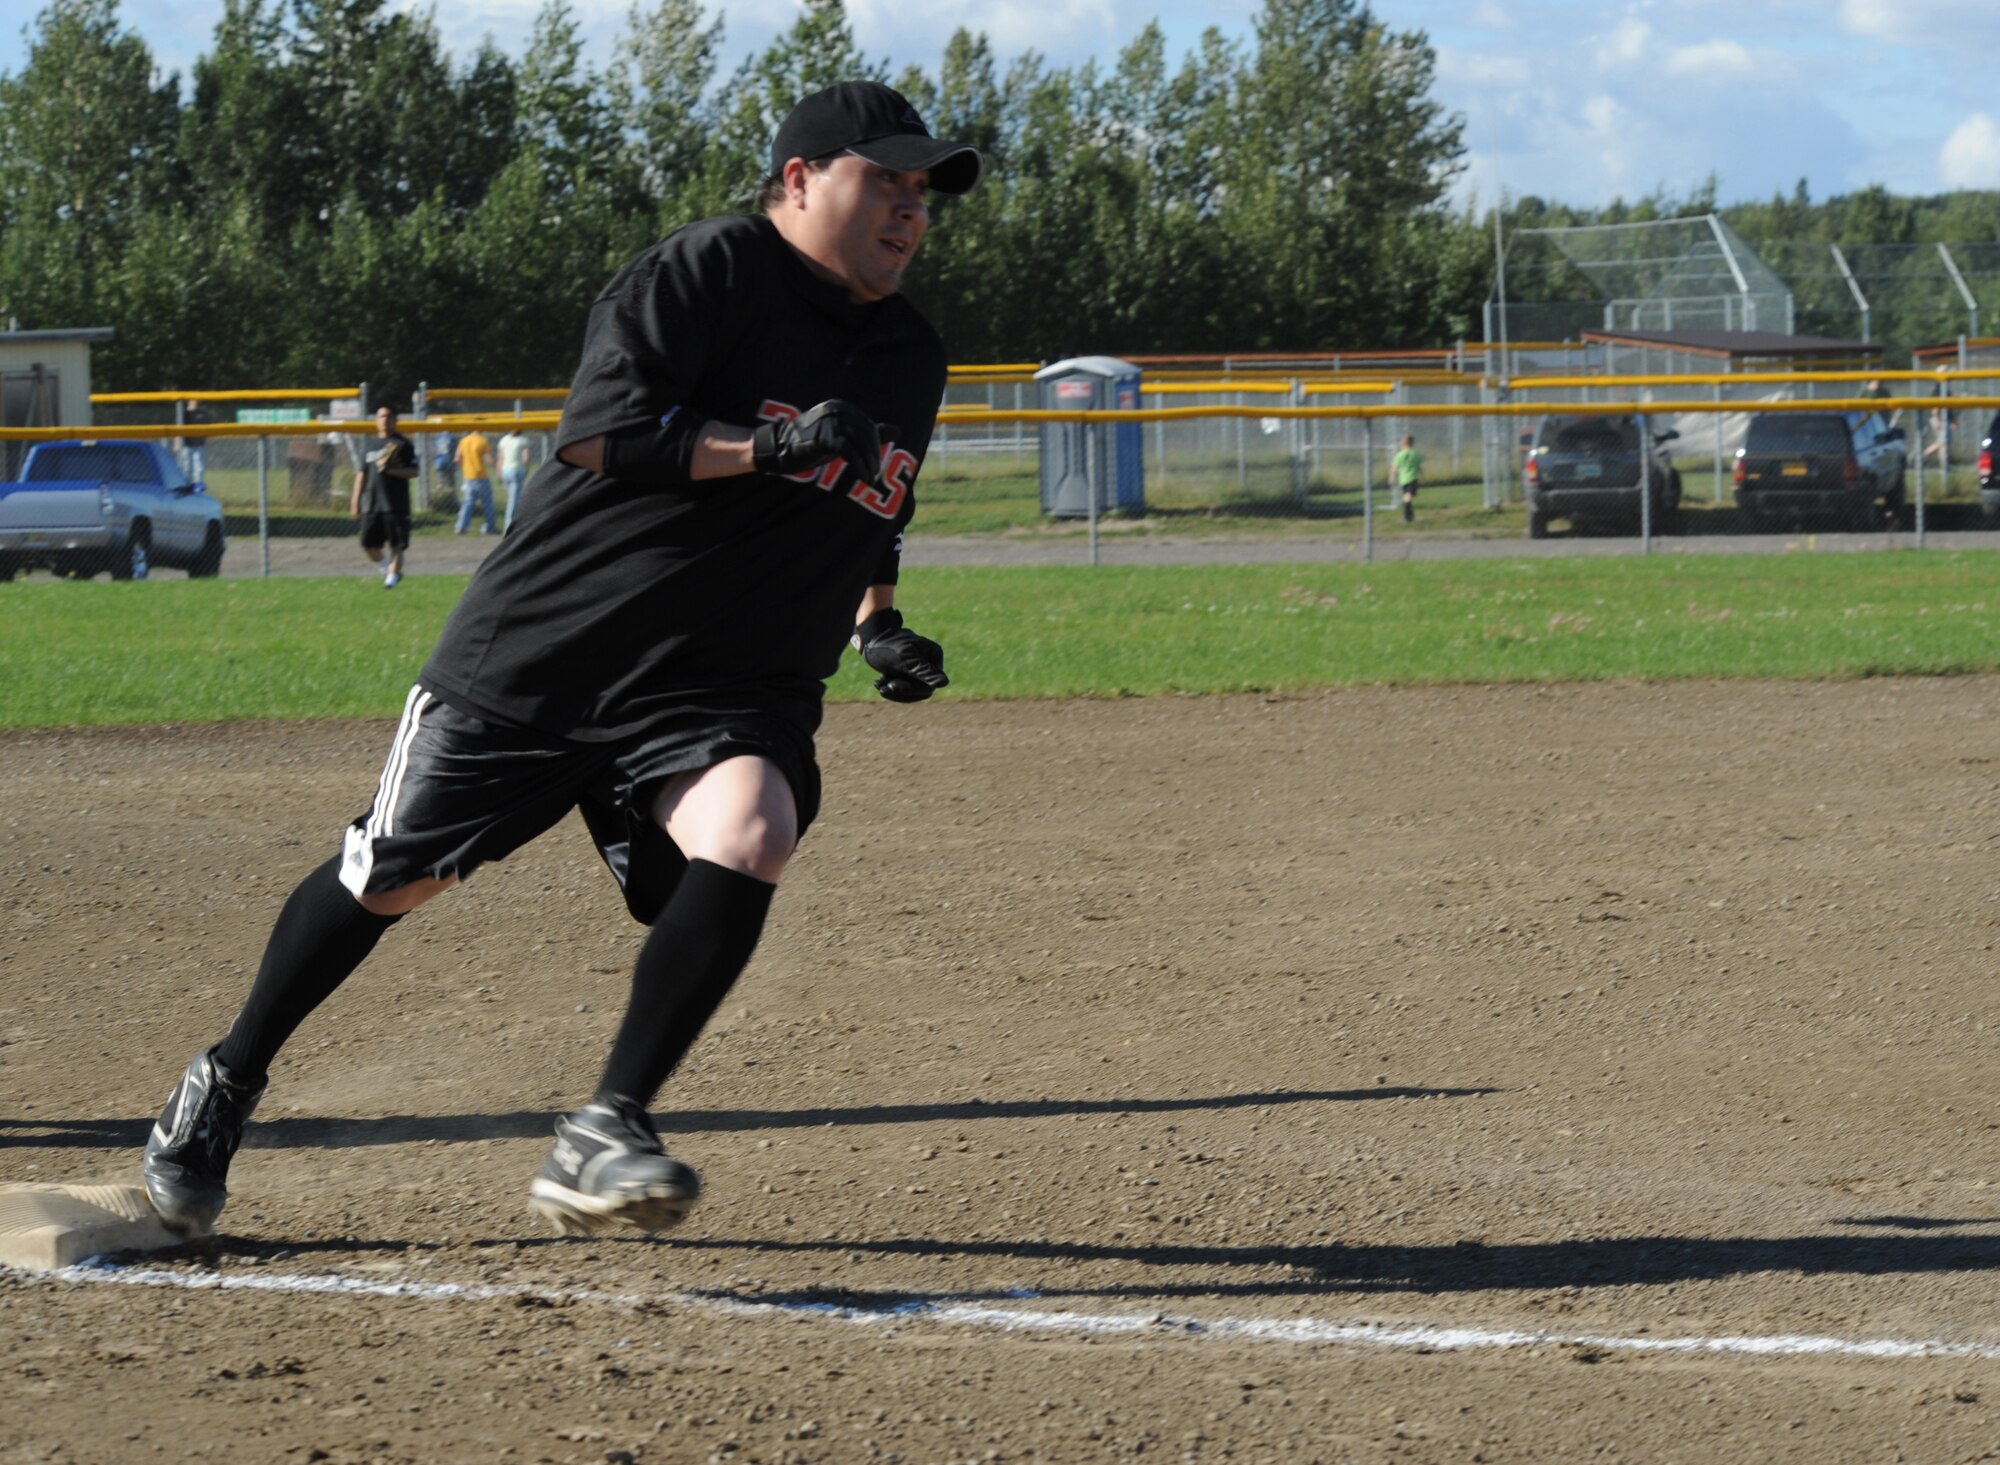 ELMENDORF AIR FORCE BASE, Alaska -- Matt Saiz, a member of the 381st Intelligence Squadron softball team, heads for home during the game August 6. The 381st IS went head to head with the 19th Fighter Squadron Gamecocks in a bid for the Intramural Softball Championship game. The 381st IS won the championship game finishing the season with a record of 10-1. (U.S. Air Force photo/Airman 1st Class Matthew Owens)